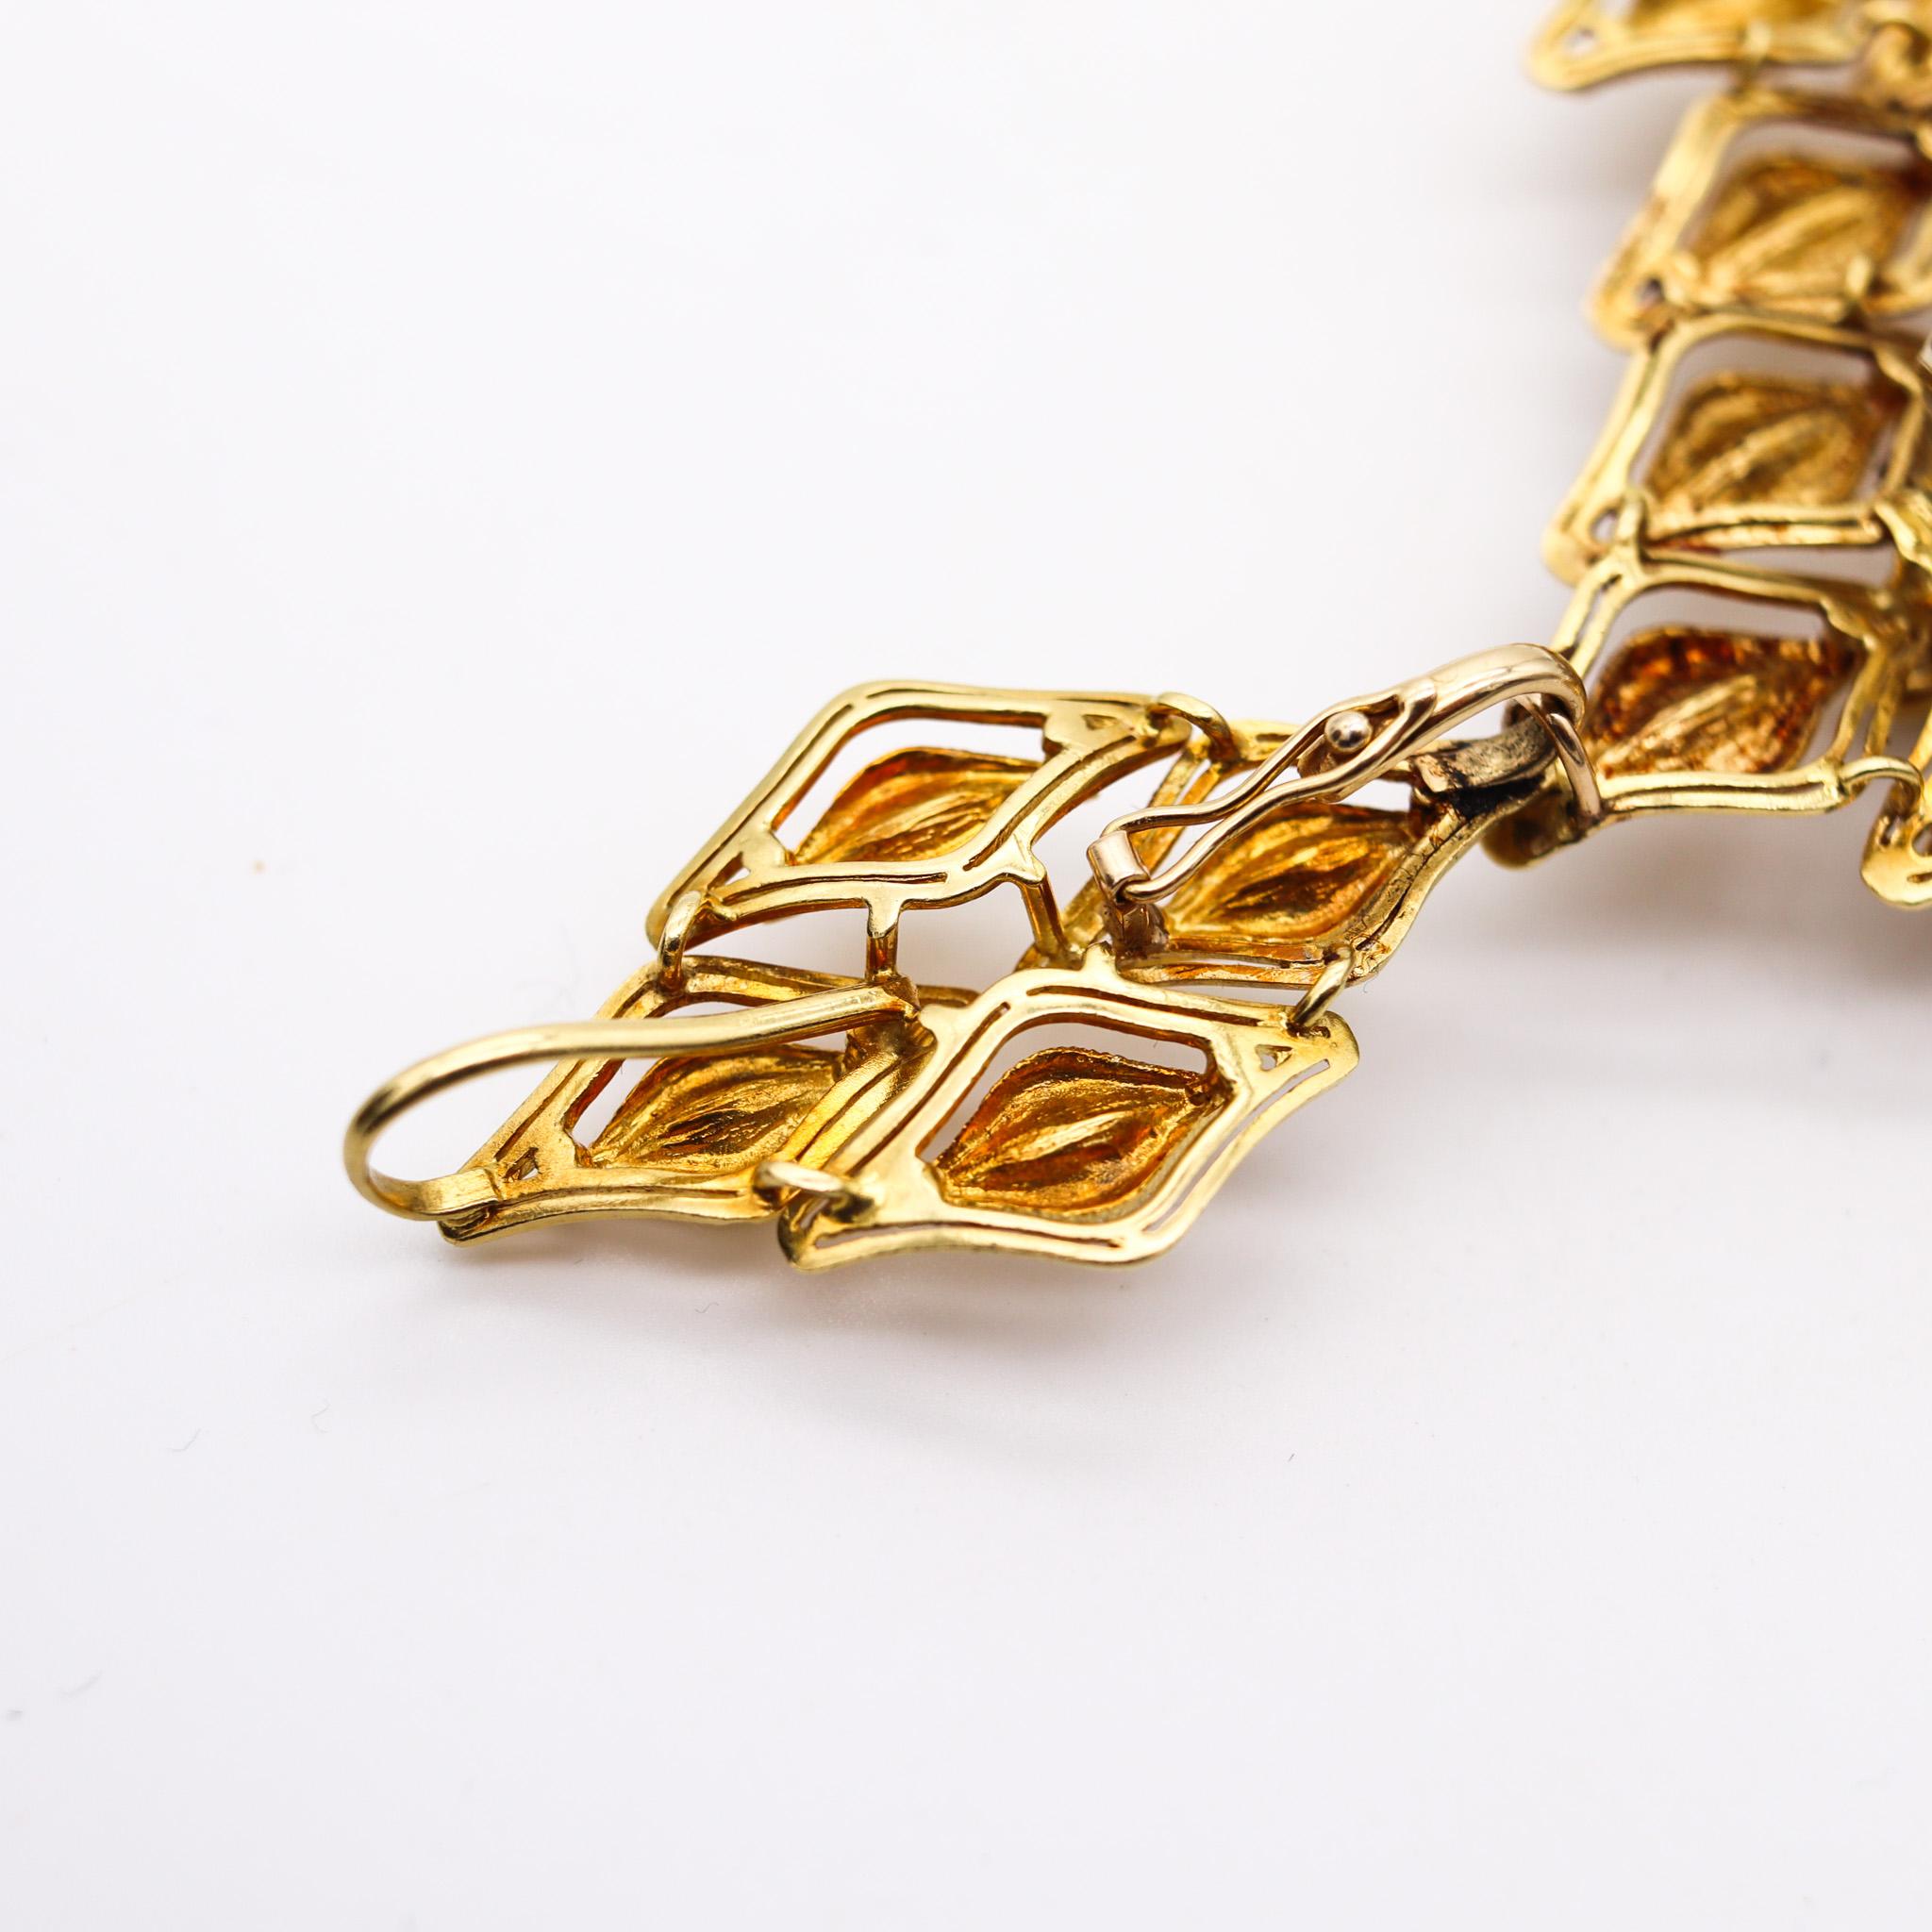 Spritzer & Furhmann 1960 Retro Modernist Large Pendant In Solid 18Kt Yellow Gold For Sale 2